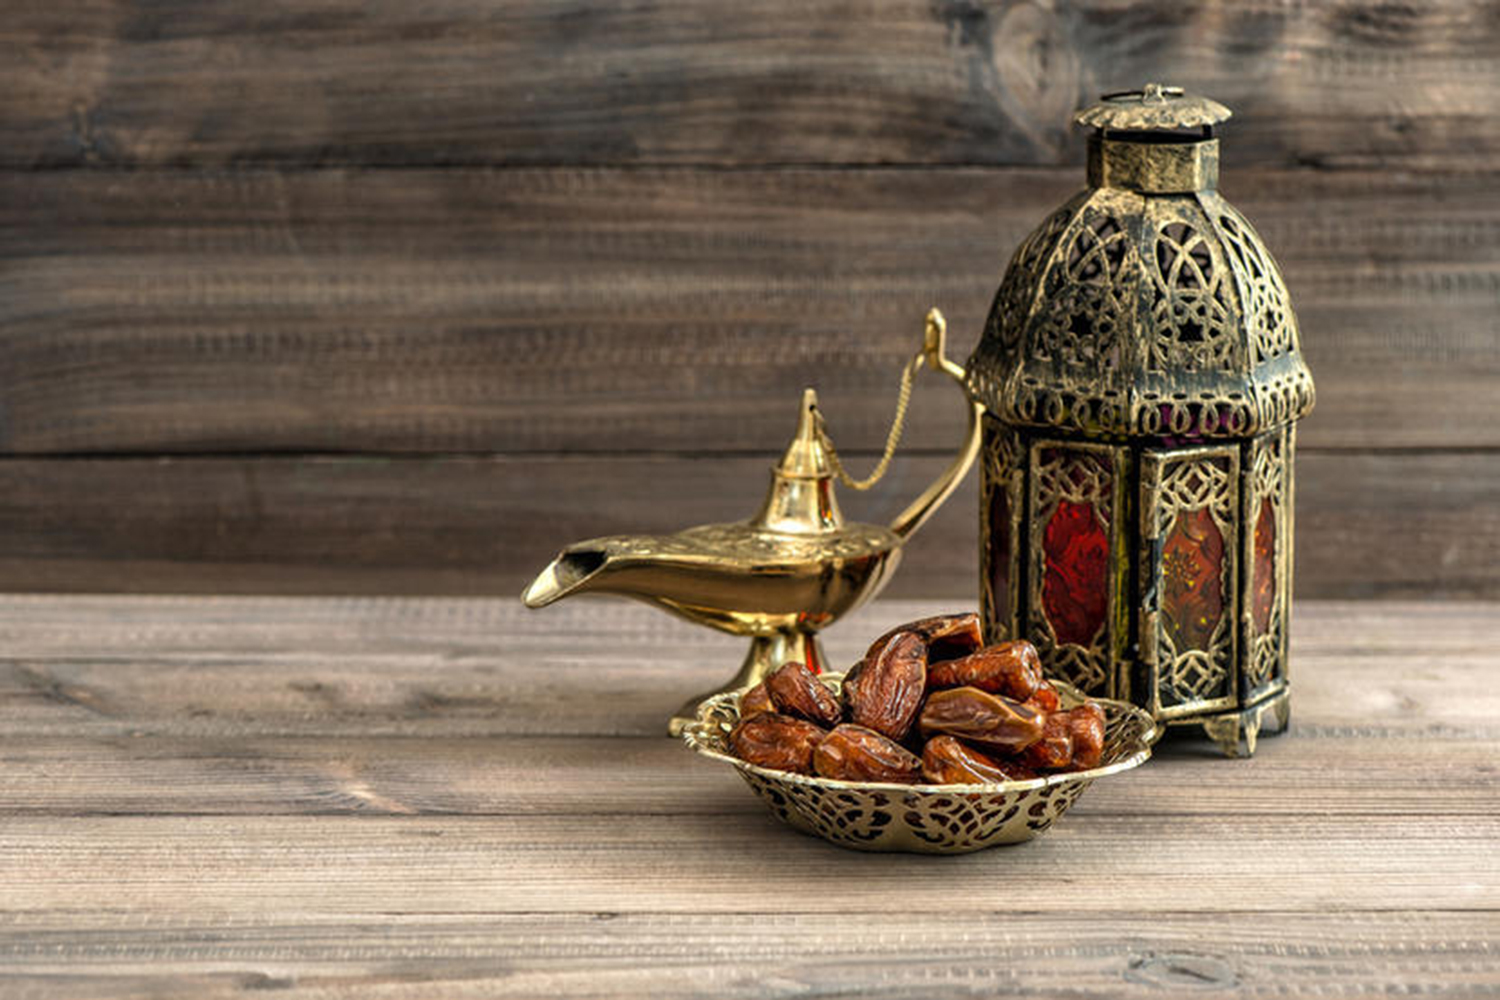 How should you behave during Ramadan in Oman? Rules and etiquette guide